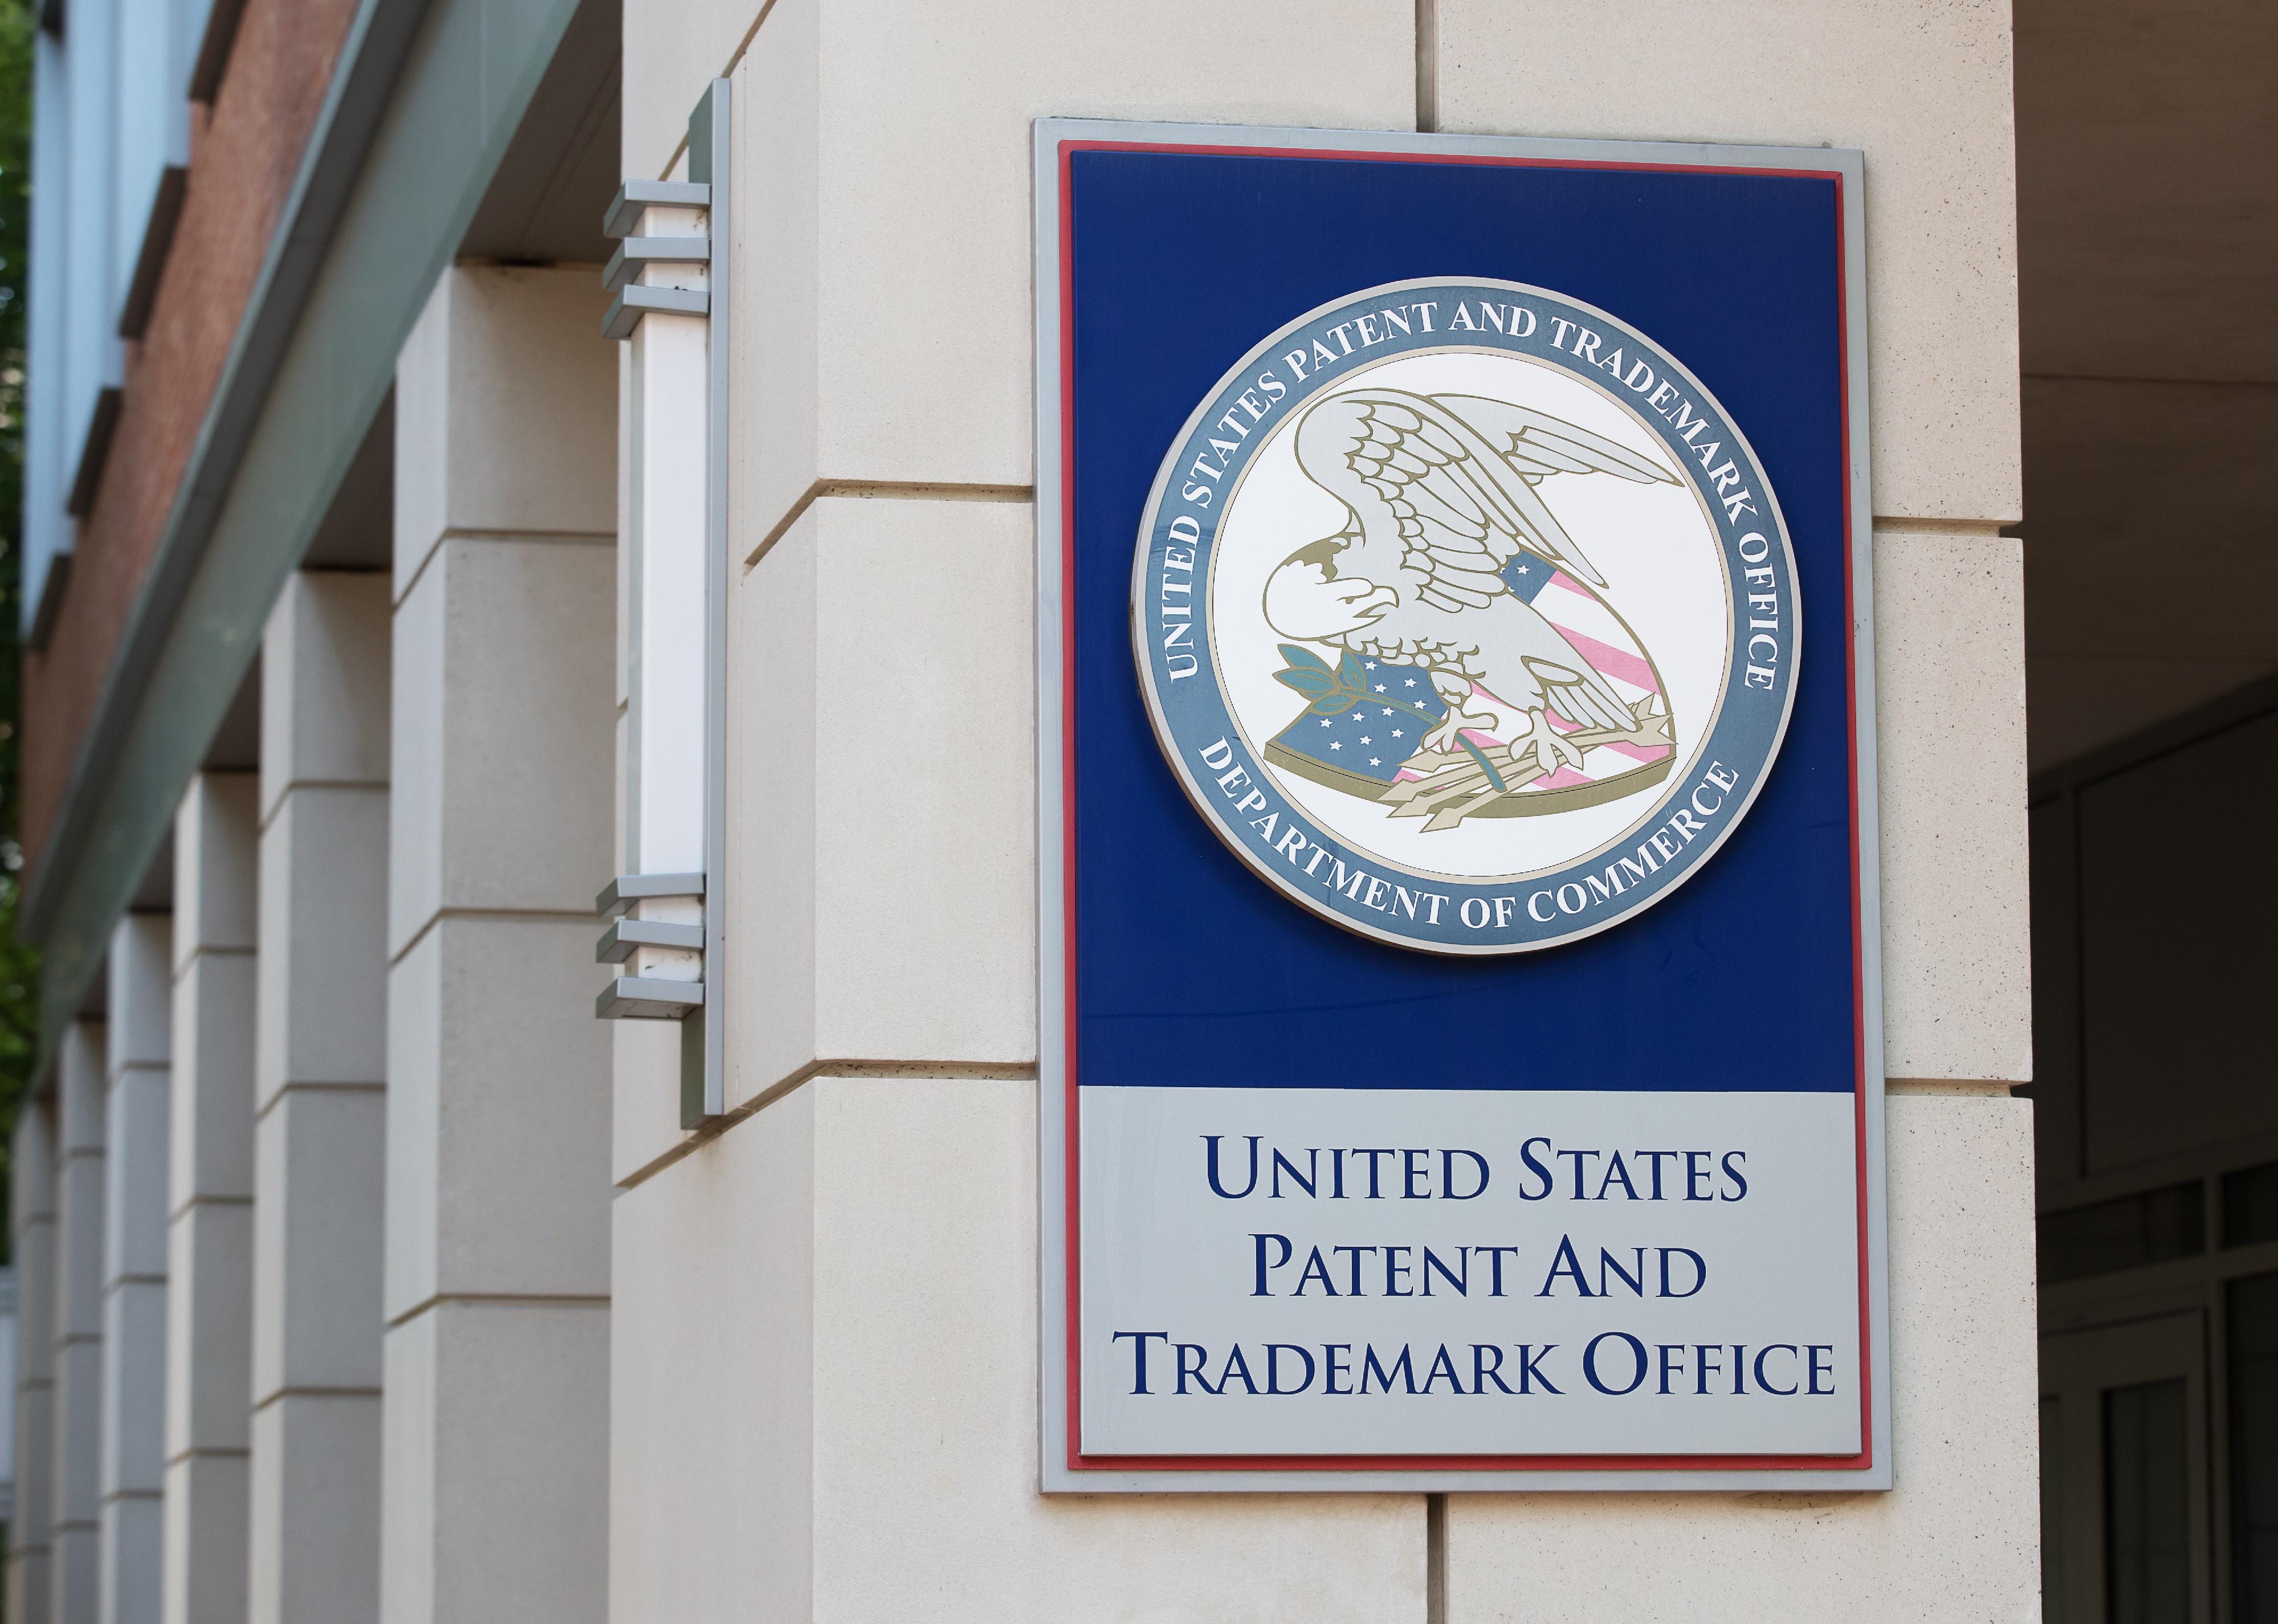 The United States Patent and Trademark Office.